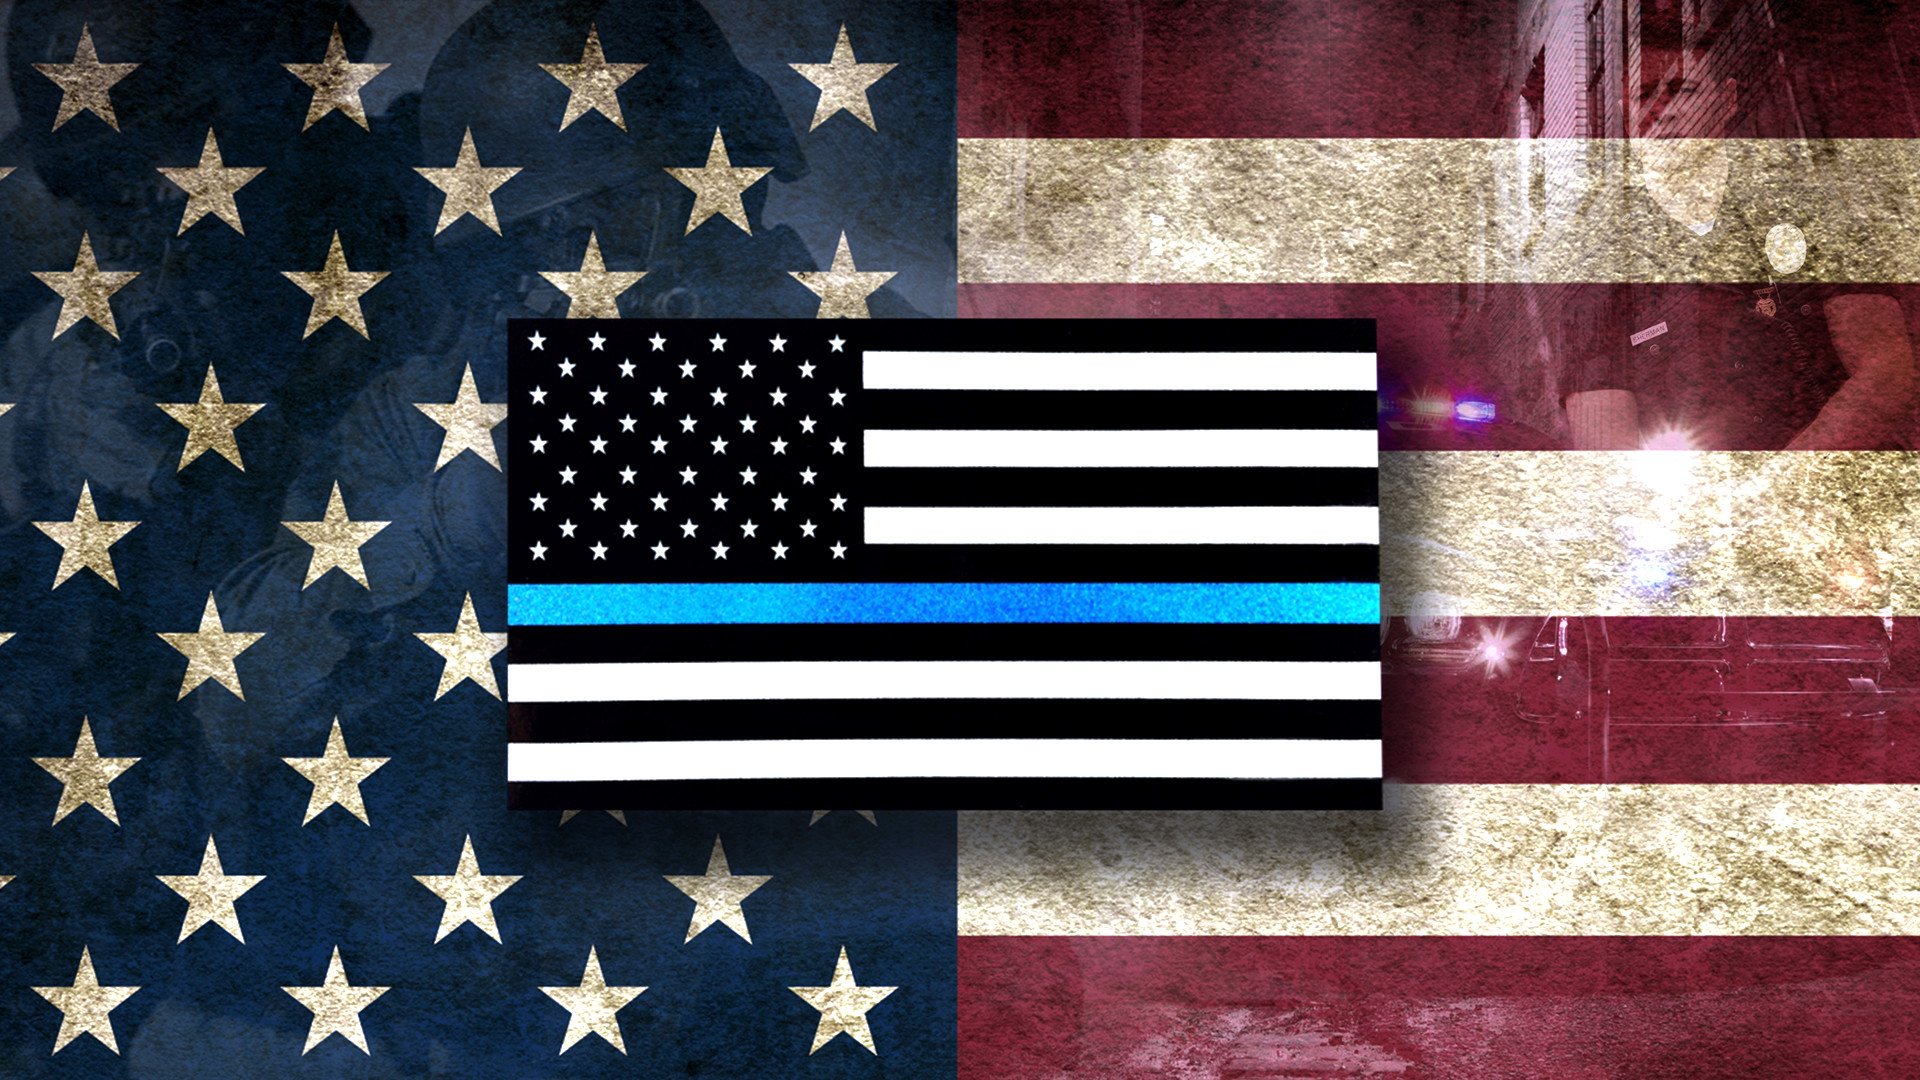 Police Thin Blue Line Wallpaper 59 images